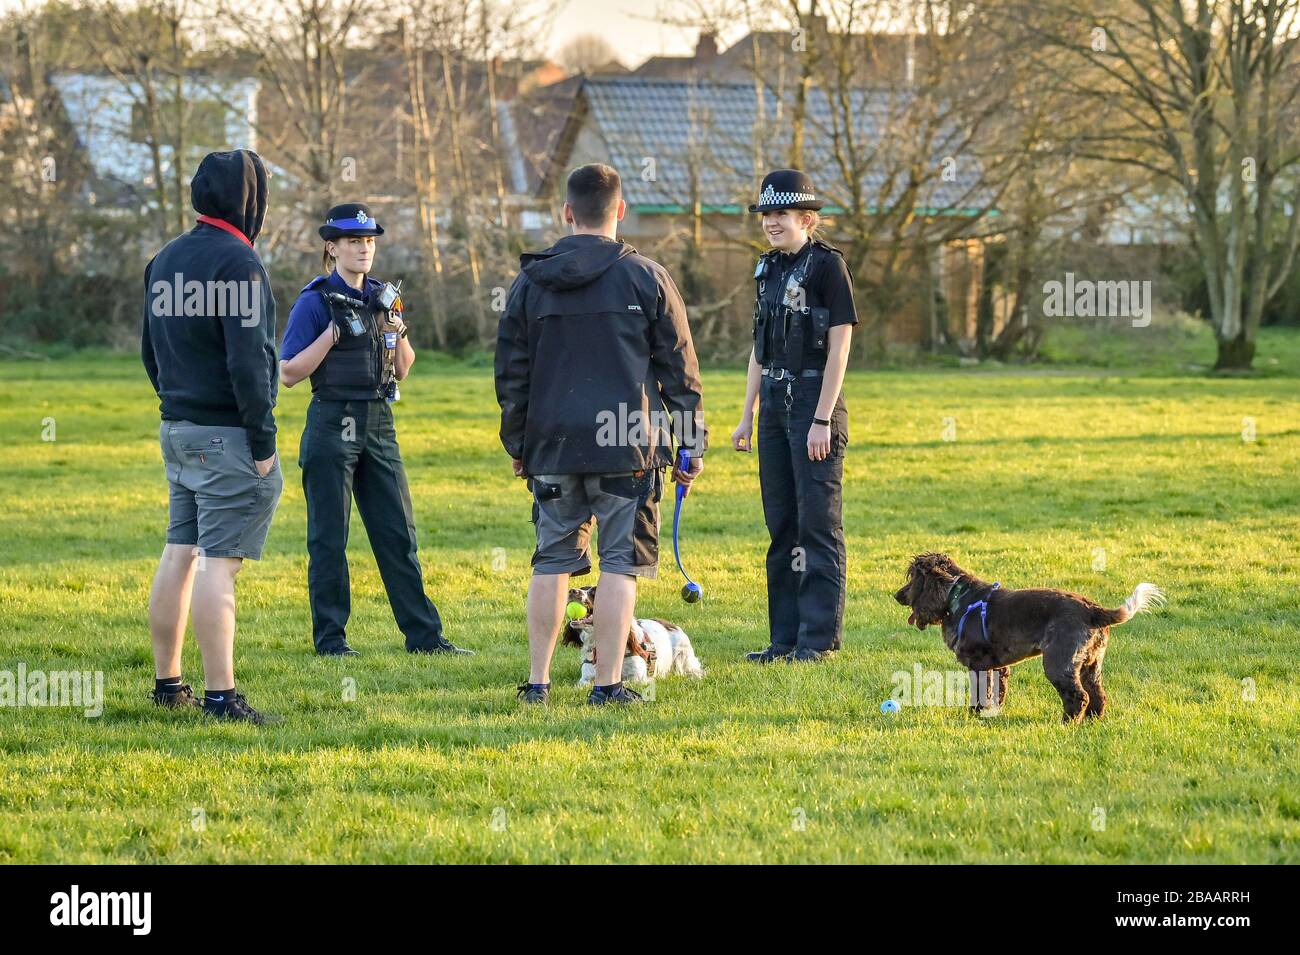 Avon and Somerset Police officers chat to dog walkers in a park in Bristol, where they are patrolling and enforcing the coronavirus lockdown rules. Stock Photo